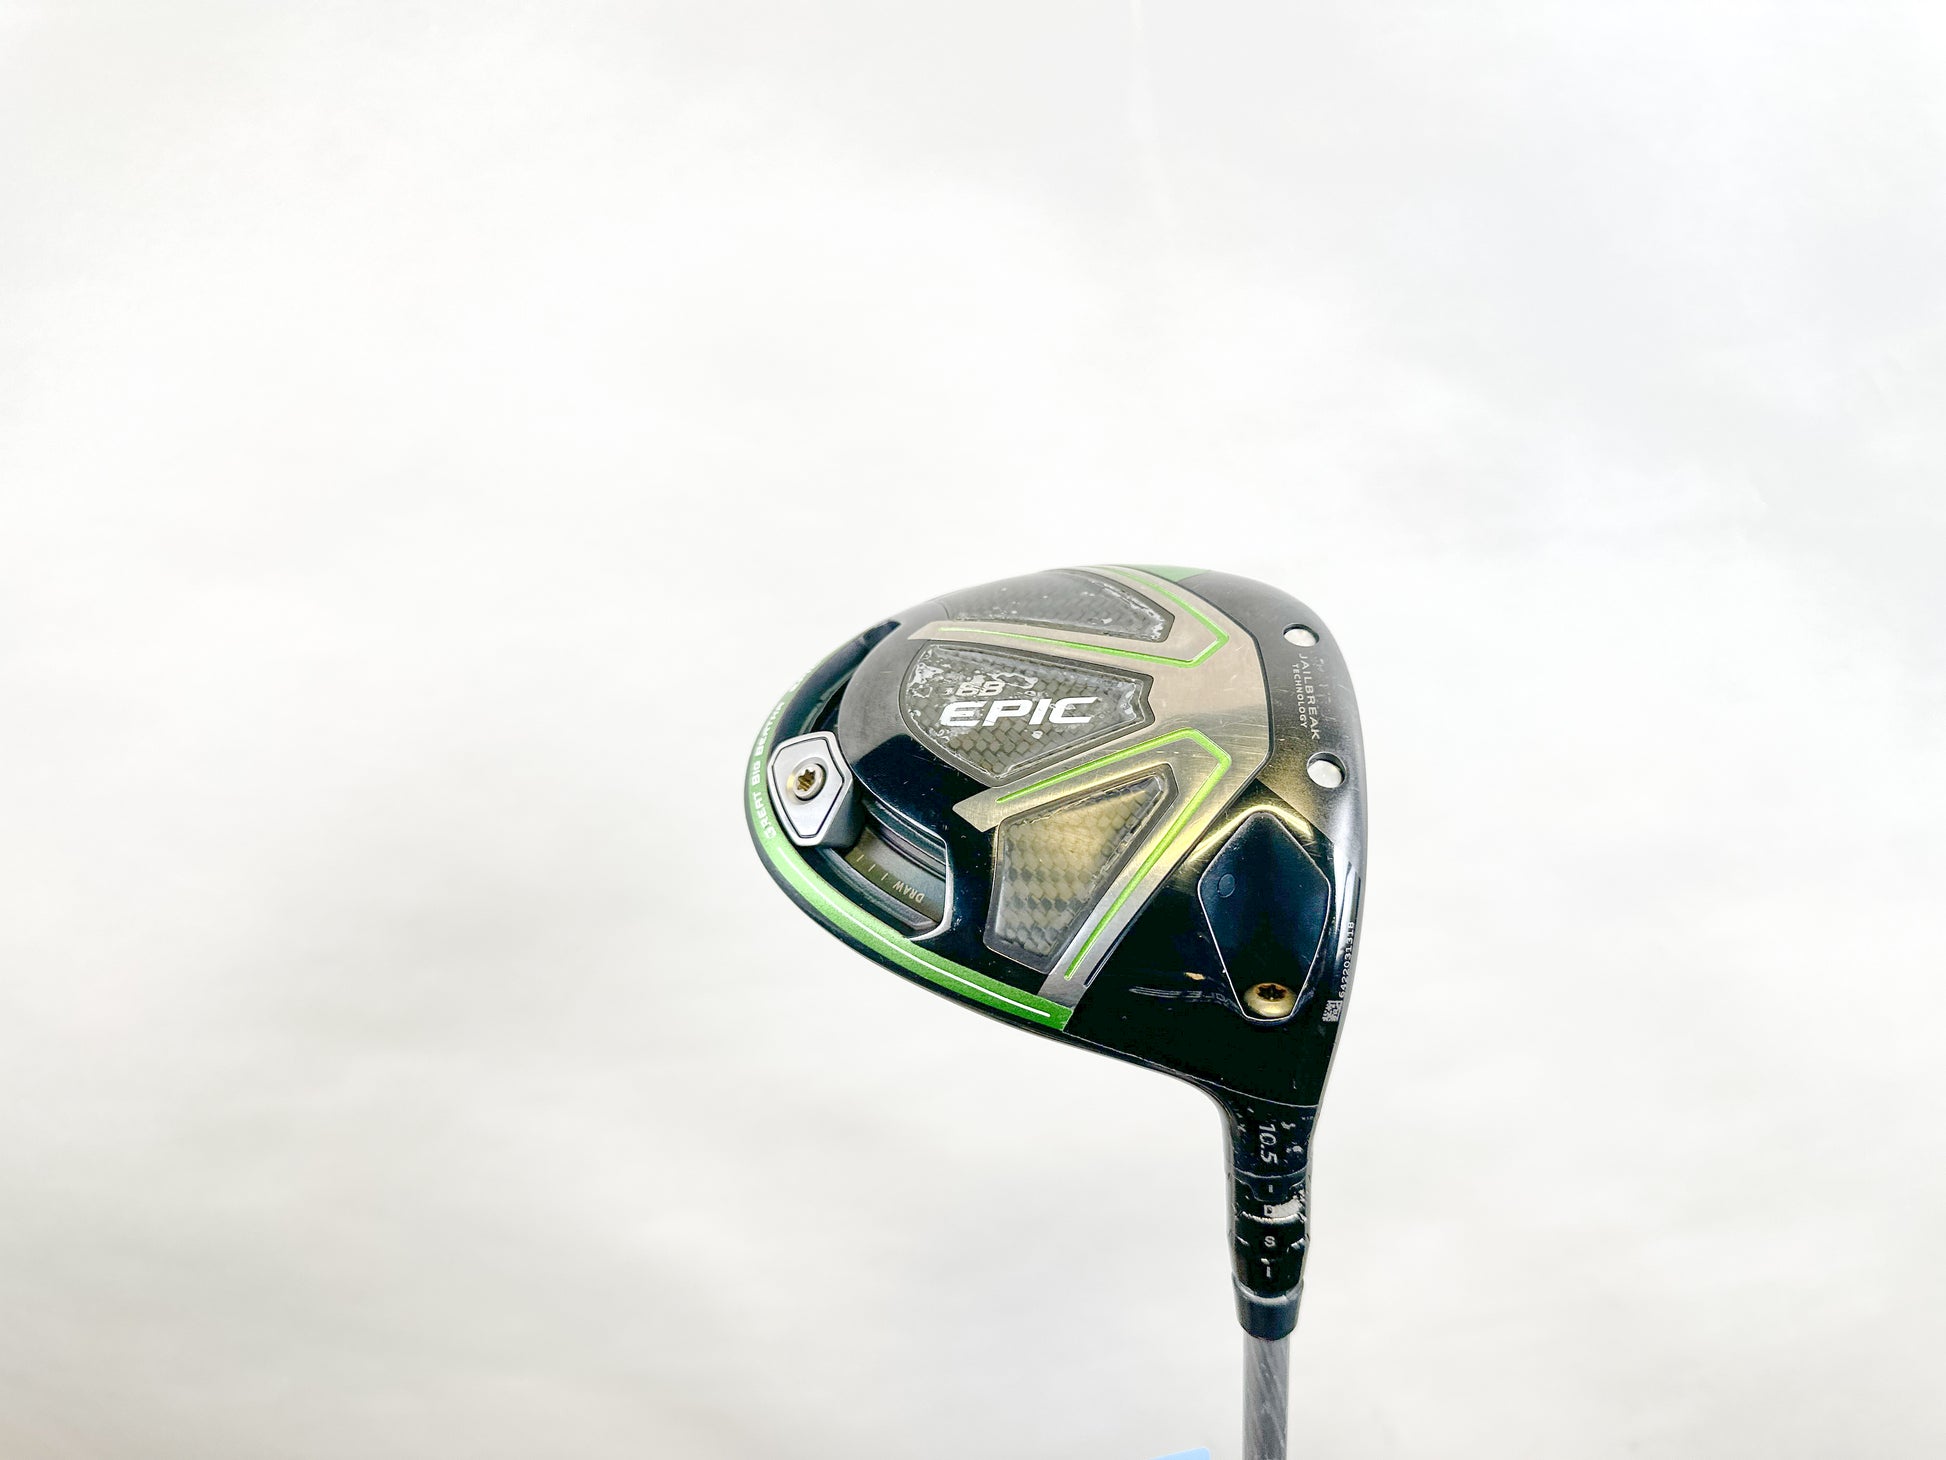 Used Callaway Great Big Bertha Epic Driver - Right-Handed - 10.5 Degrees - Seniors Flex-Next Round